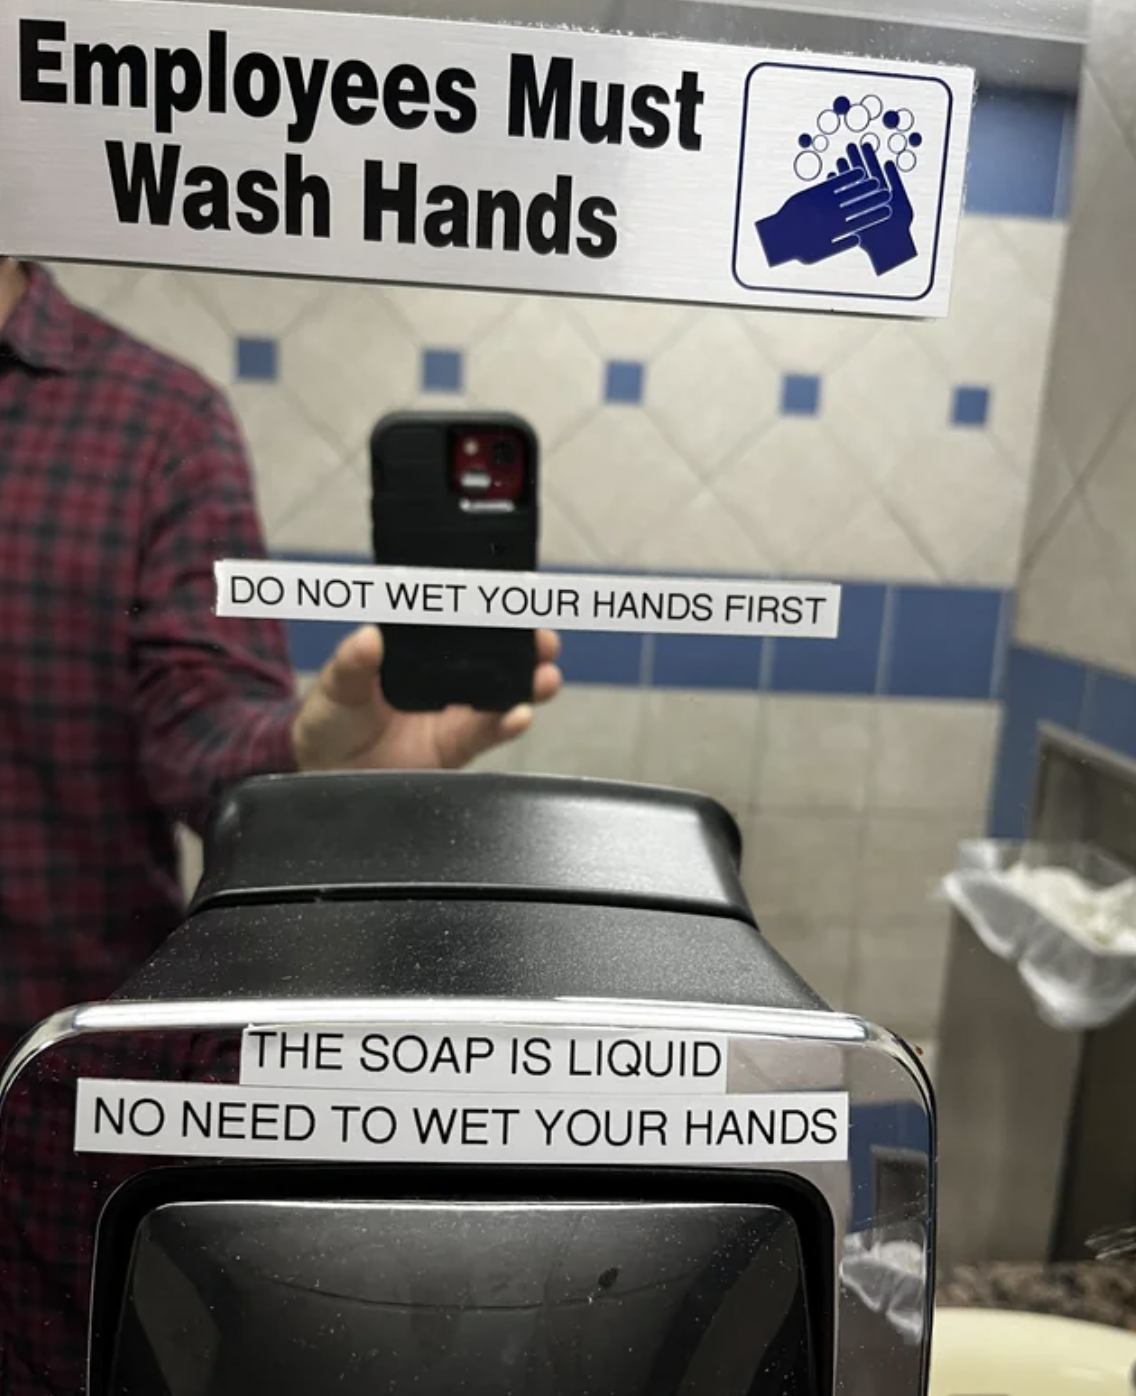 Signs: &quot;Employees Must Wash Hands&quot; above mirror &amp;amp; &quot;THE SOAP IS LIQUID NO NEED TO WET YOUR HANDS&quot; on soap dispenser